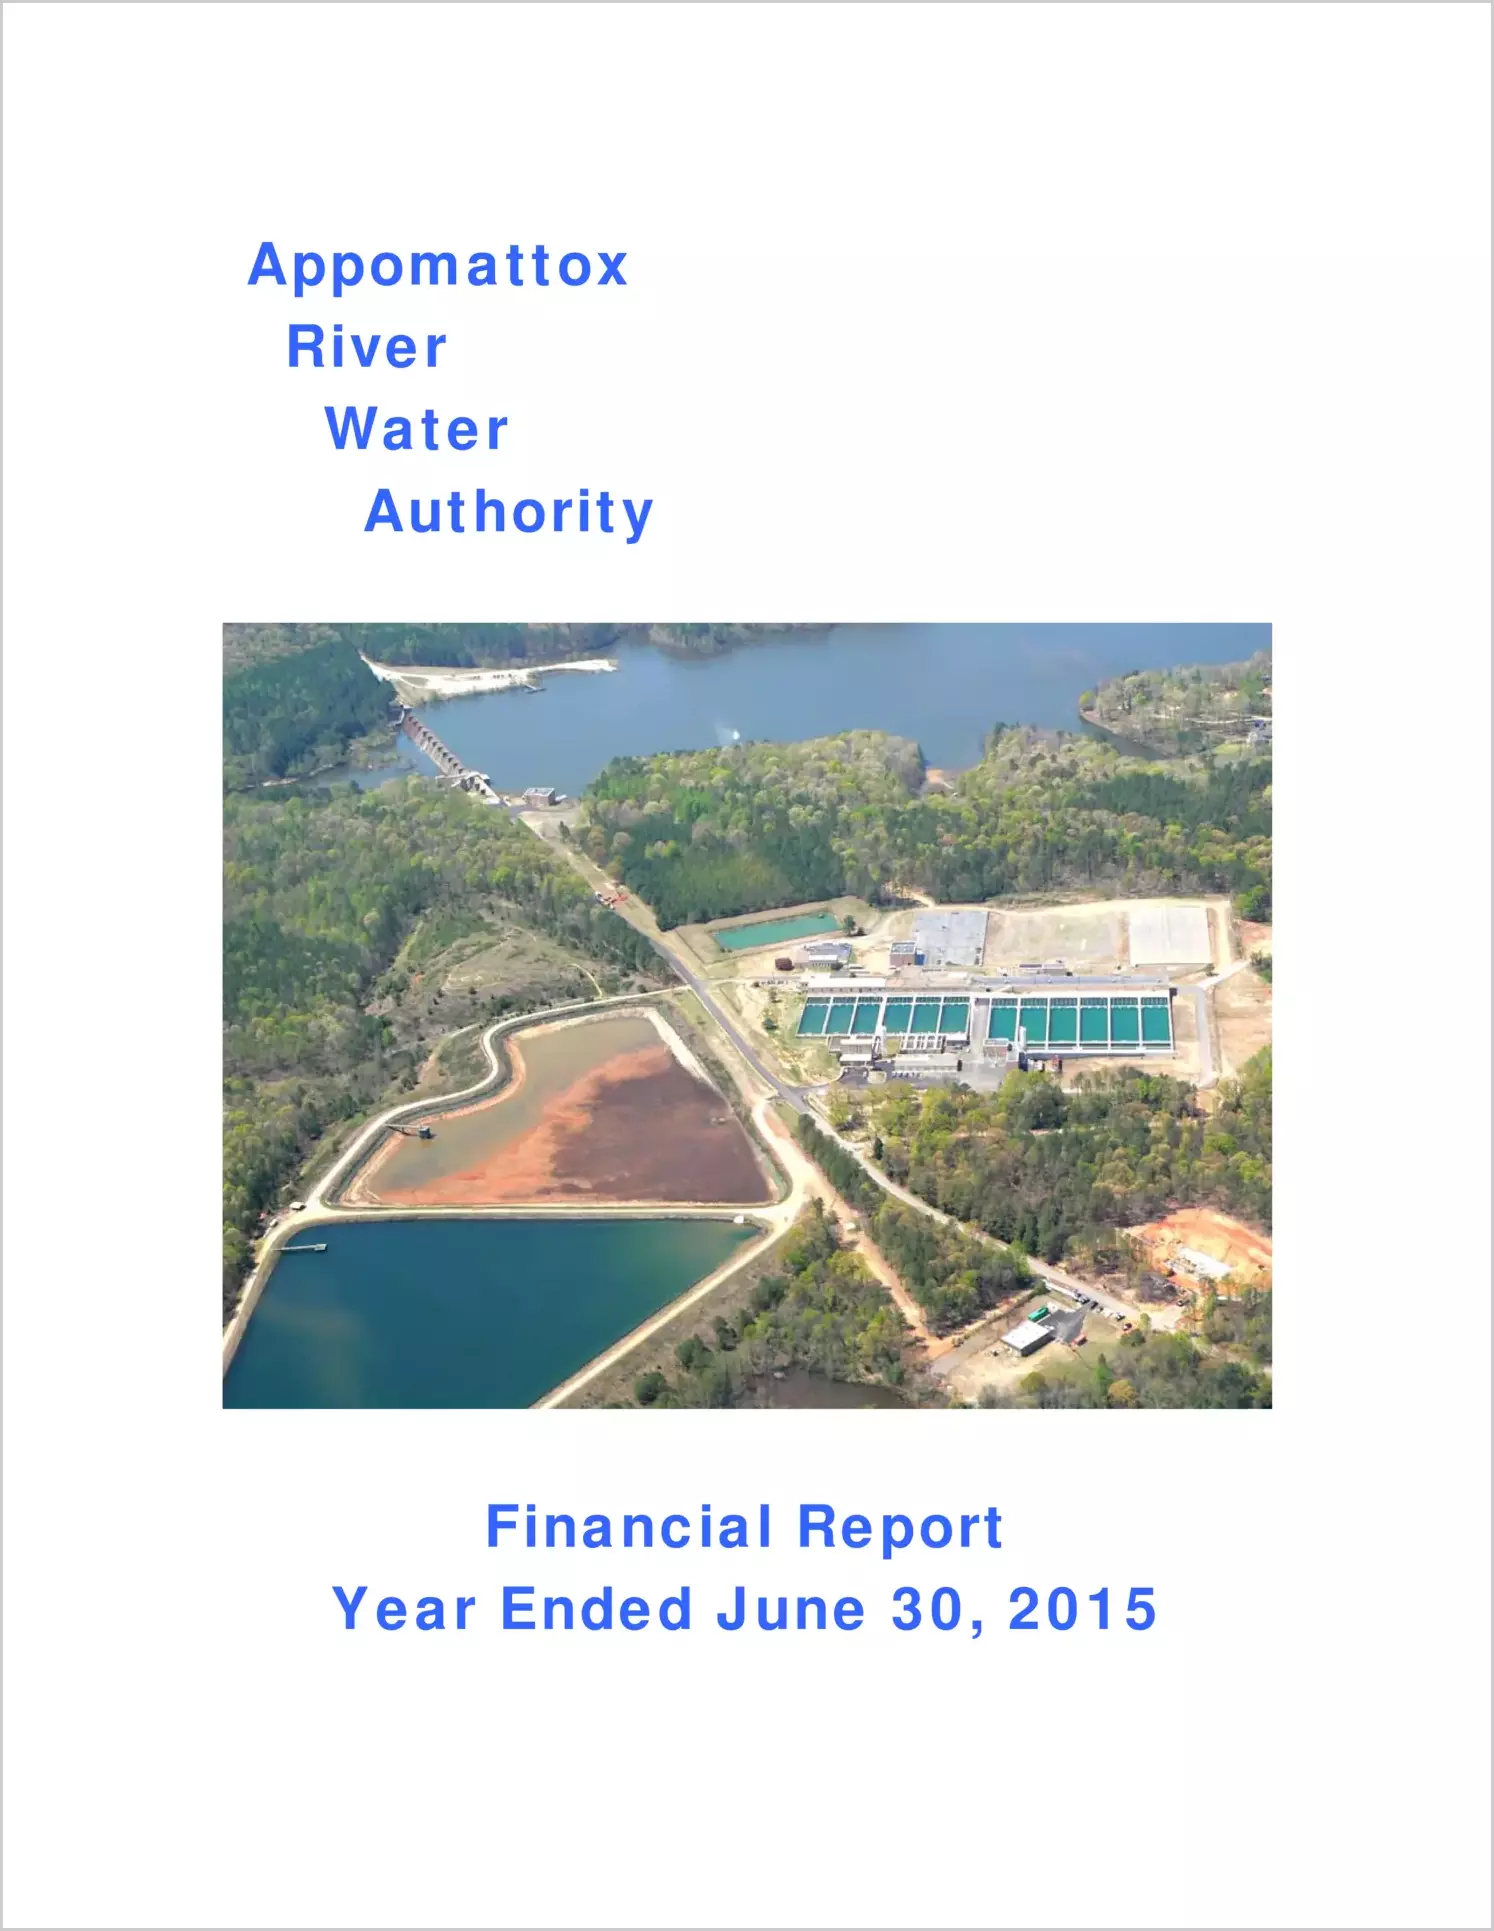 2015 ABC/Other Annual Financial Report  for Appomattox River Water Authority